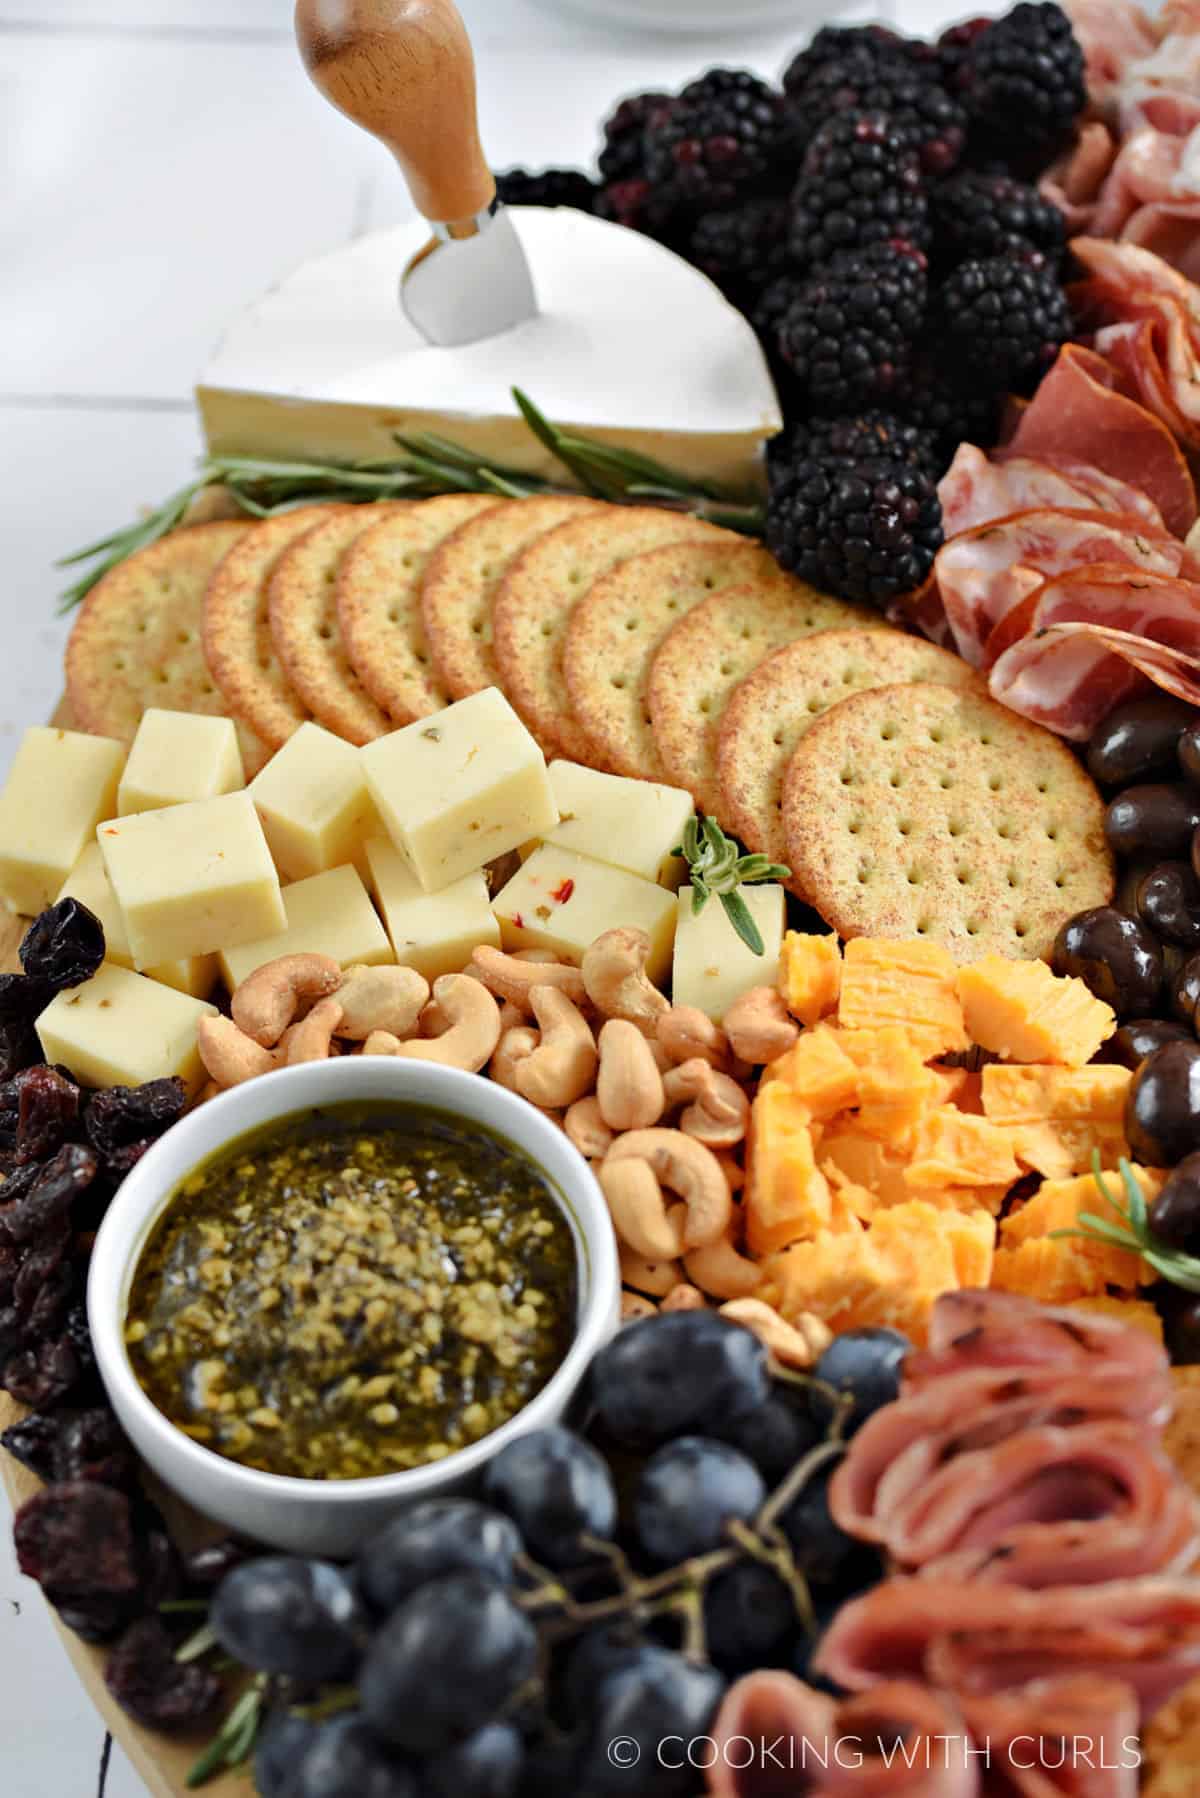 Blackberries, sliced meats, brie, bread slices, crackers, cheddar cheese, chocolate almonds, and mustard on a large appetizer board.